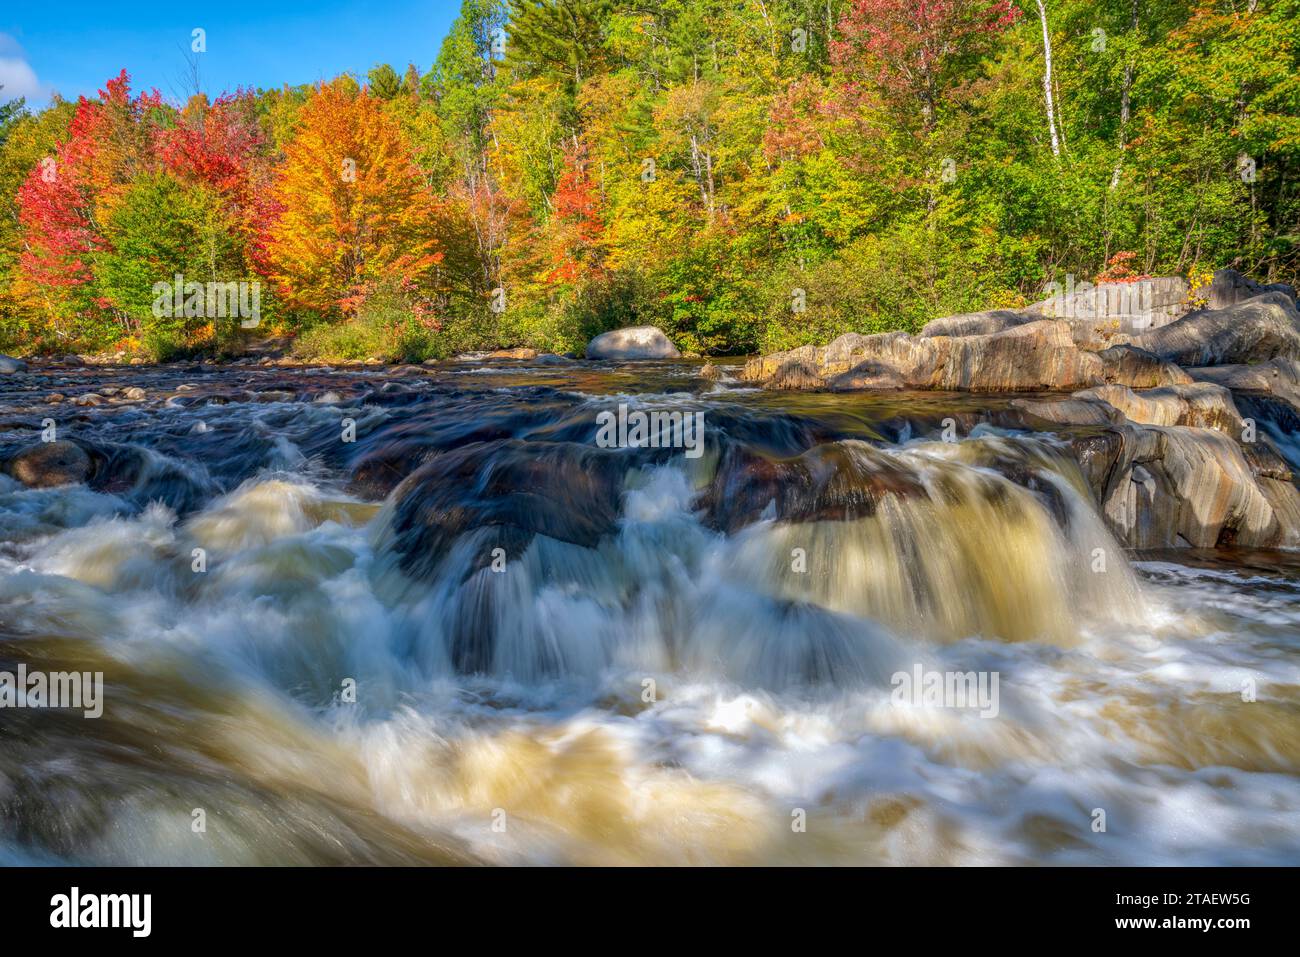 Vibrant autumn leaves on the riverbank with cascading water combine to create a symphony of nature's beauty. Stock Photo